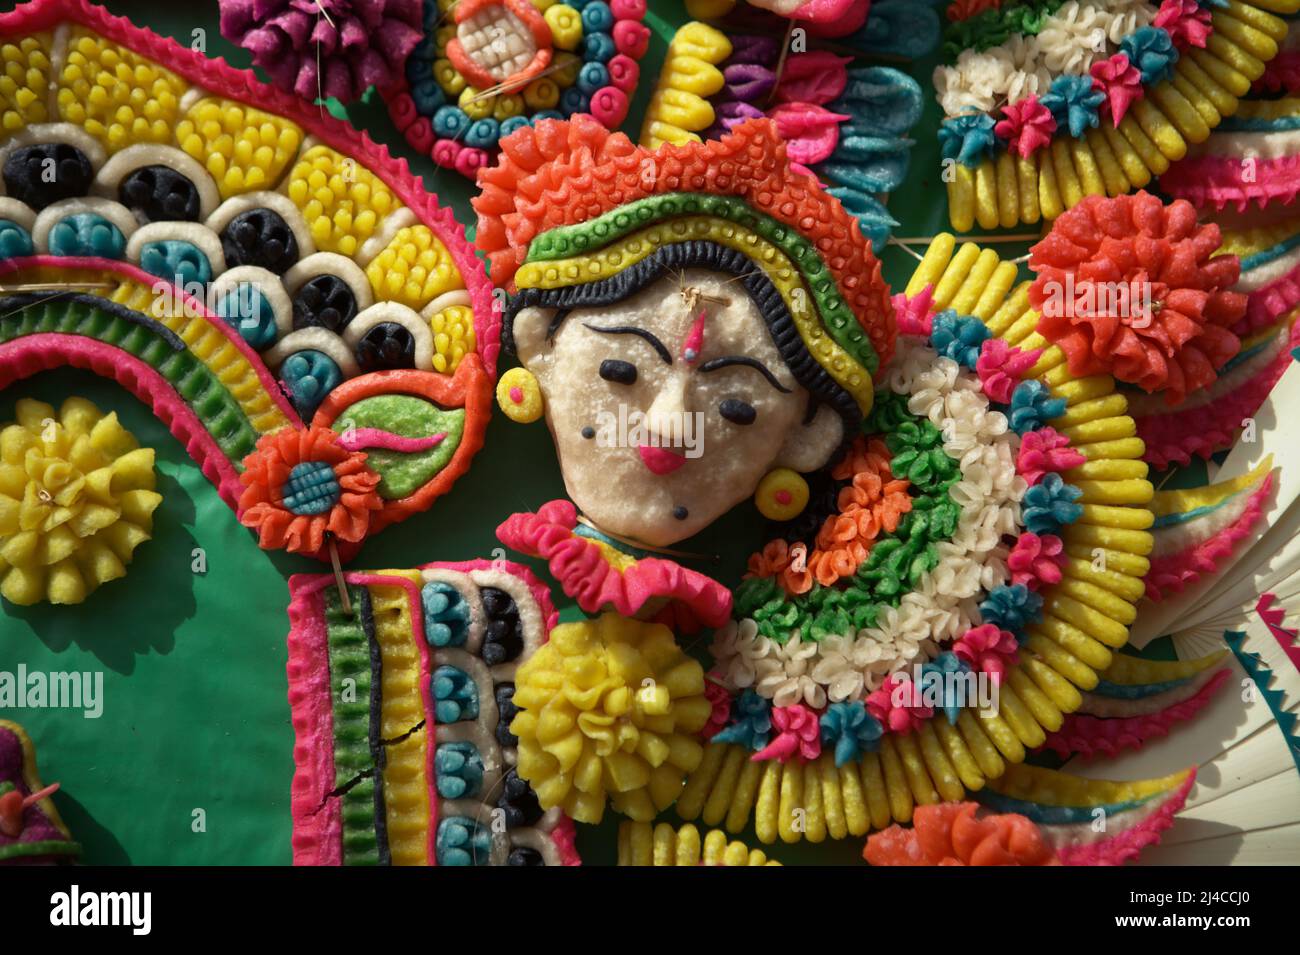 Traditional, sculptural art made of rice flour as an offering for spiritual ceremony in Bedugul, Tabanan, Bali, Indonesia. Stock Photo